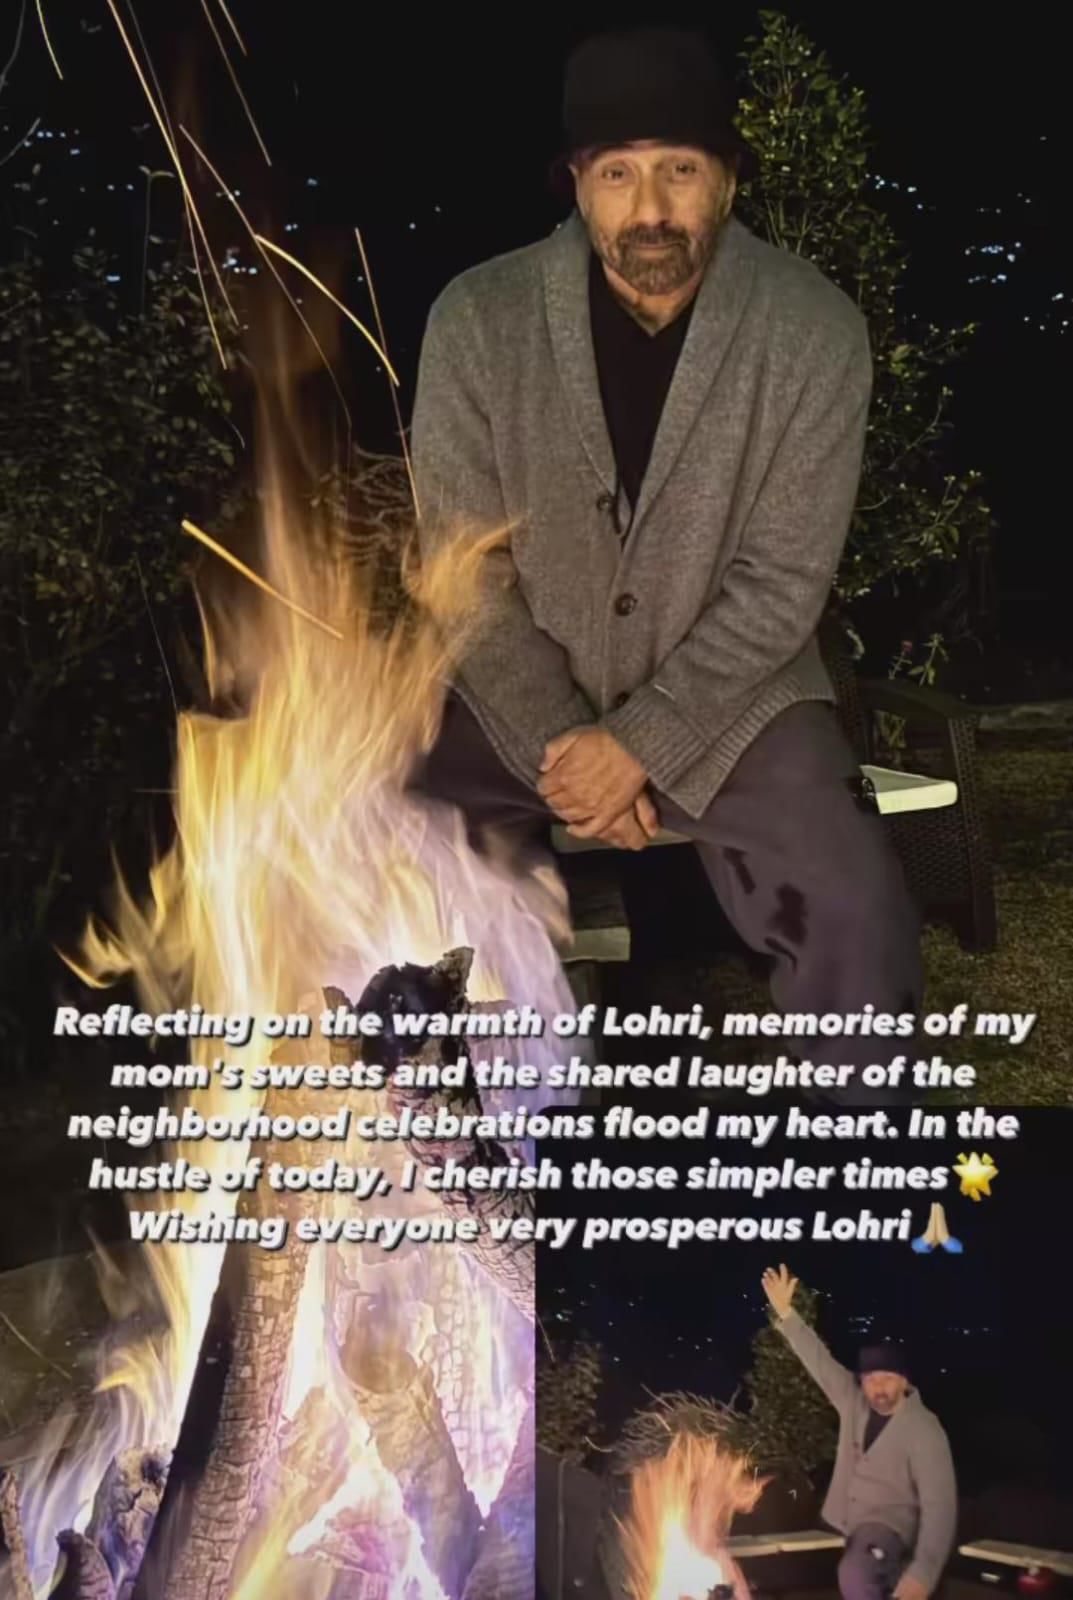 Sunny Deol reminisces about Lohri of ‘simpler times’, mom’s sweets; shares a happy picture of himself enjoying the festival